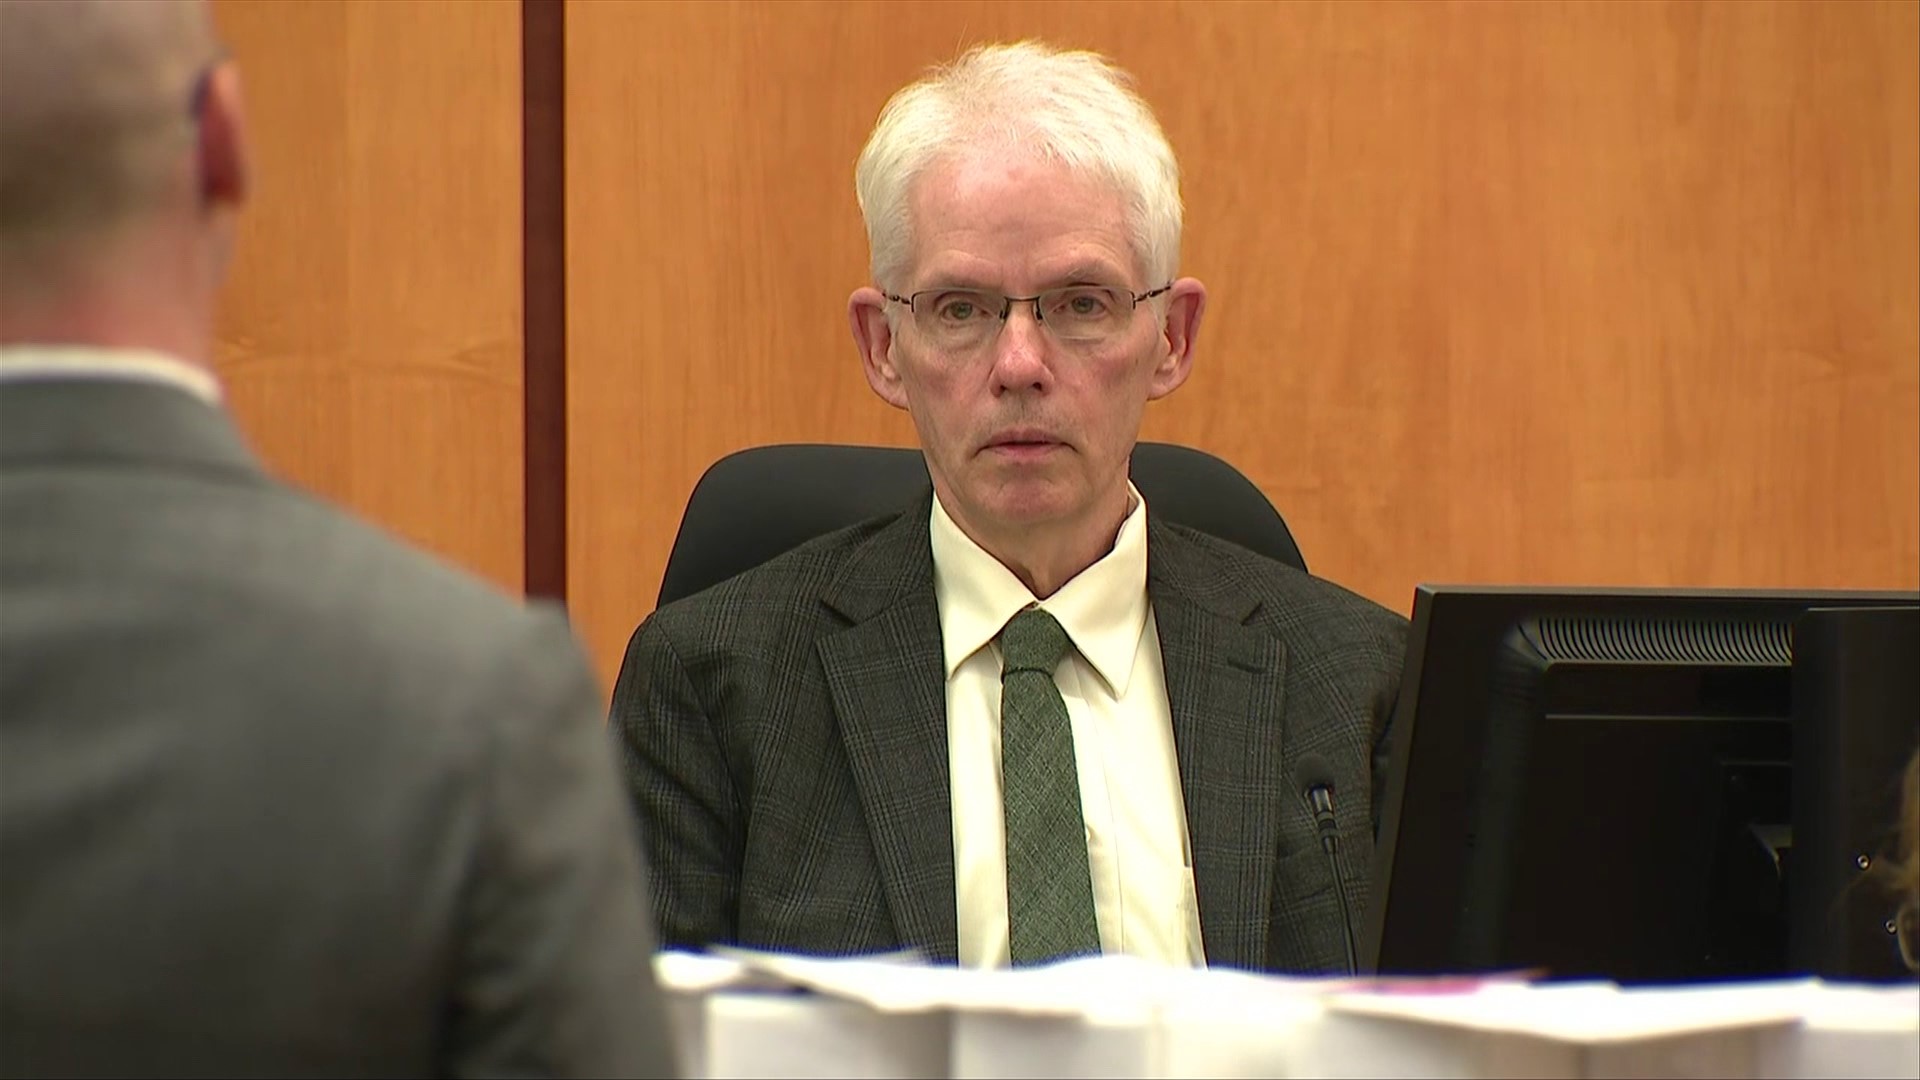 Dr. Thomas Clark, the former Pierce County medical examiner who completed Manuel Ellis' autopsy, testified on Nov. 2.